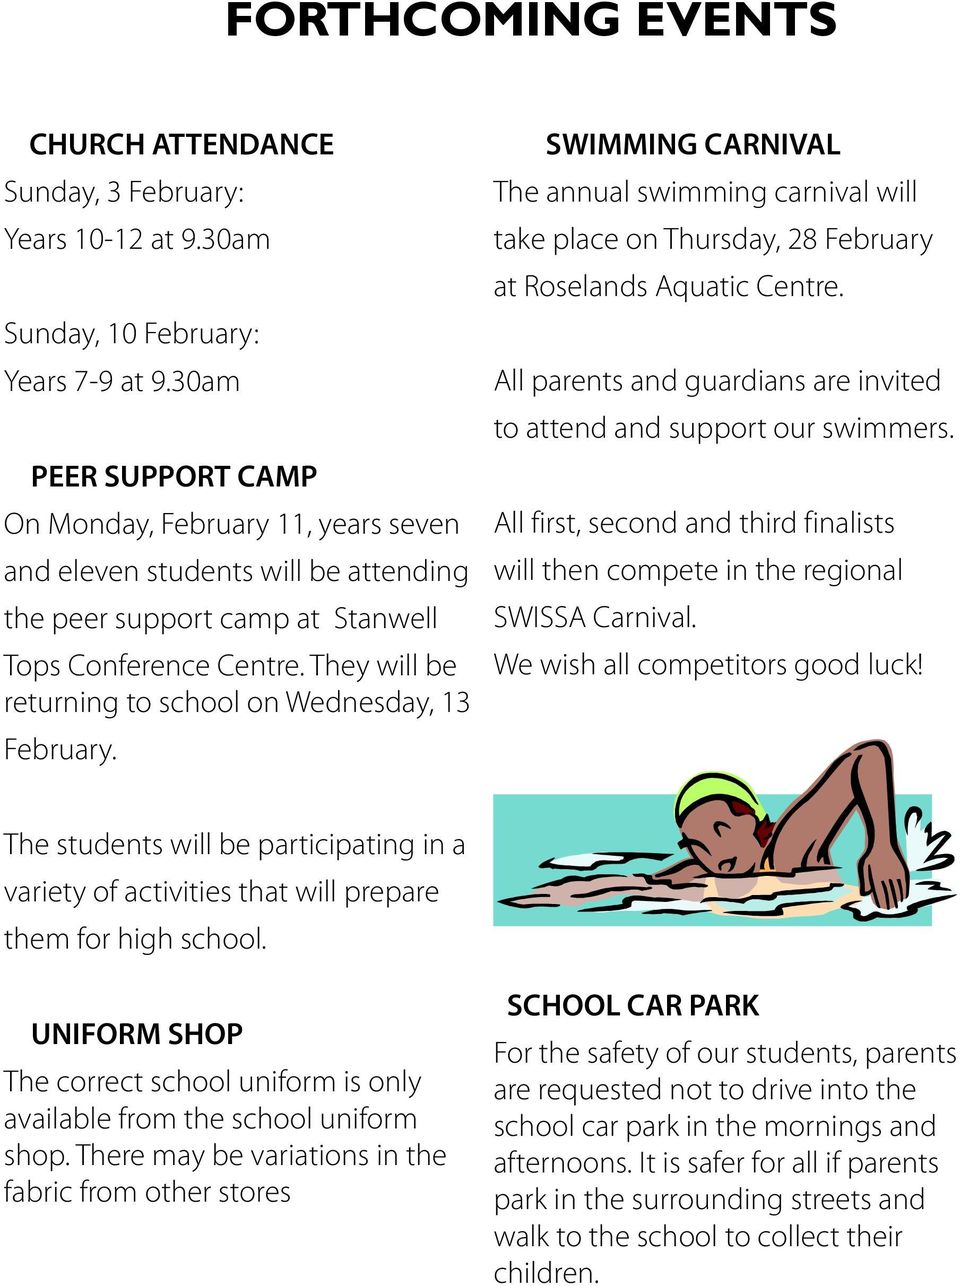 They will be returning to school on Wednesday, 13 February. SWIMMING CARNIVAL The annual swimming carnival will take place on Thursday, 28 February at Roselands Aquatic Centre.